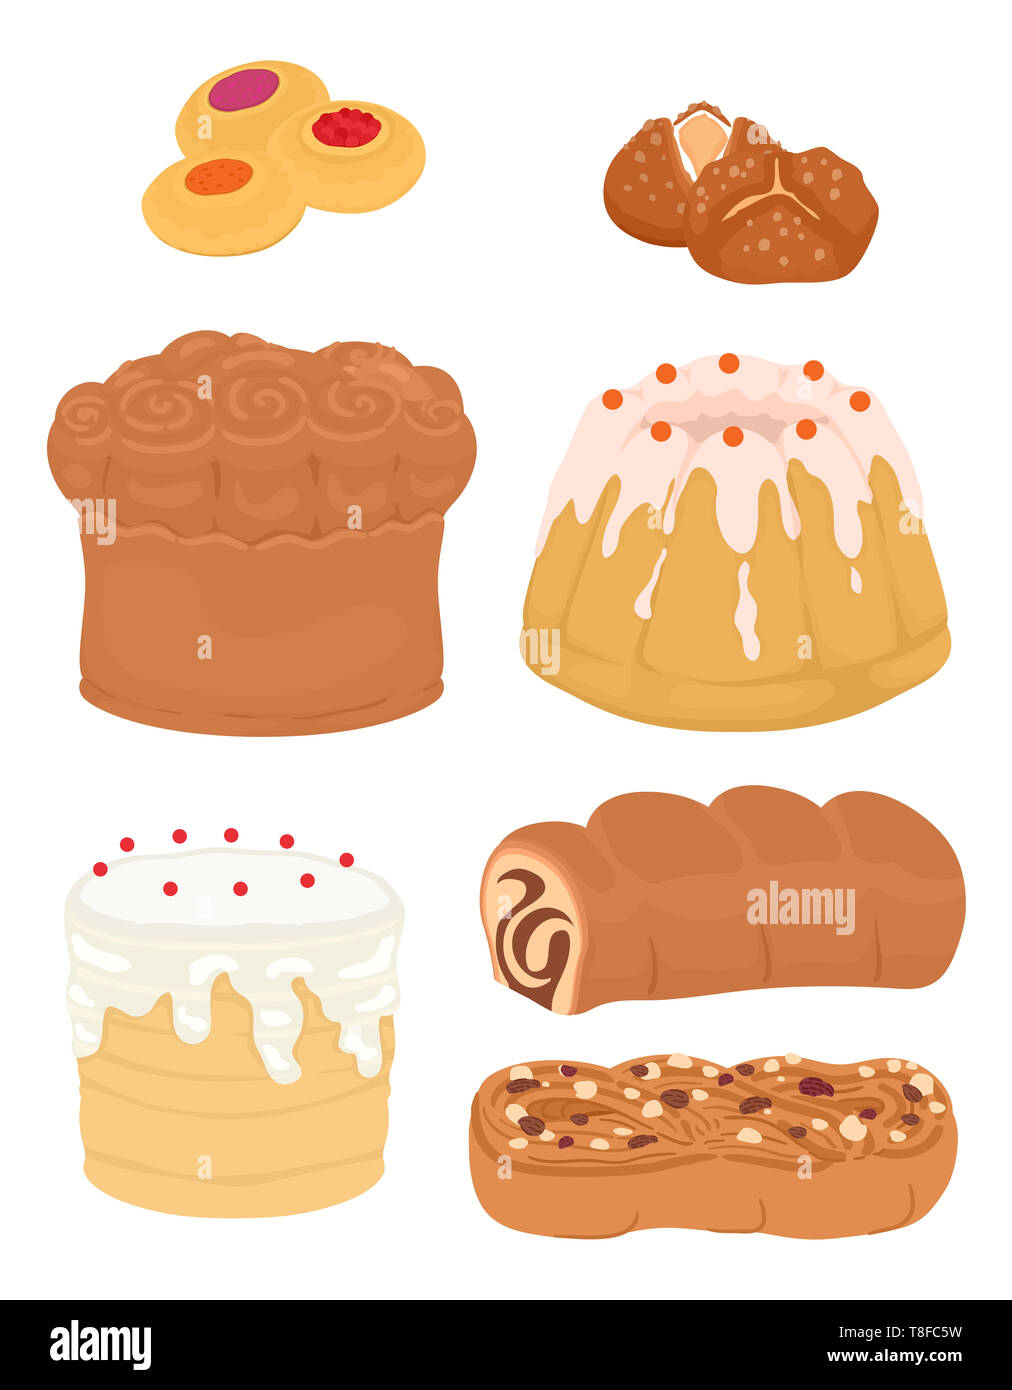 Illustration of Different Bread Served Traditionally During Easter from Kolach, Pinca, Paska, Babka, Kulich and Cozonac Stock Photo